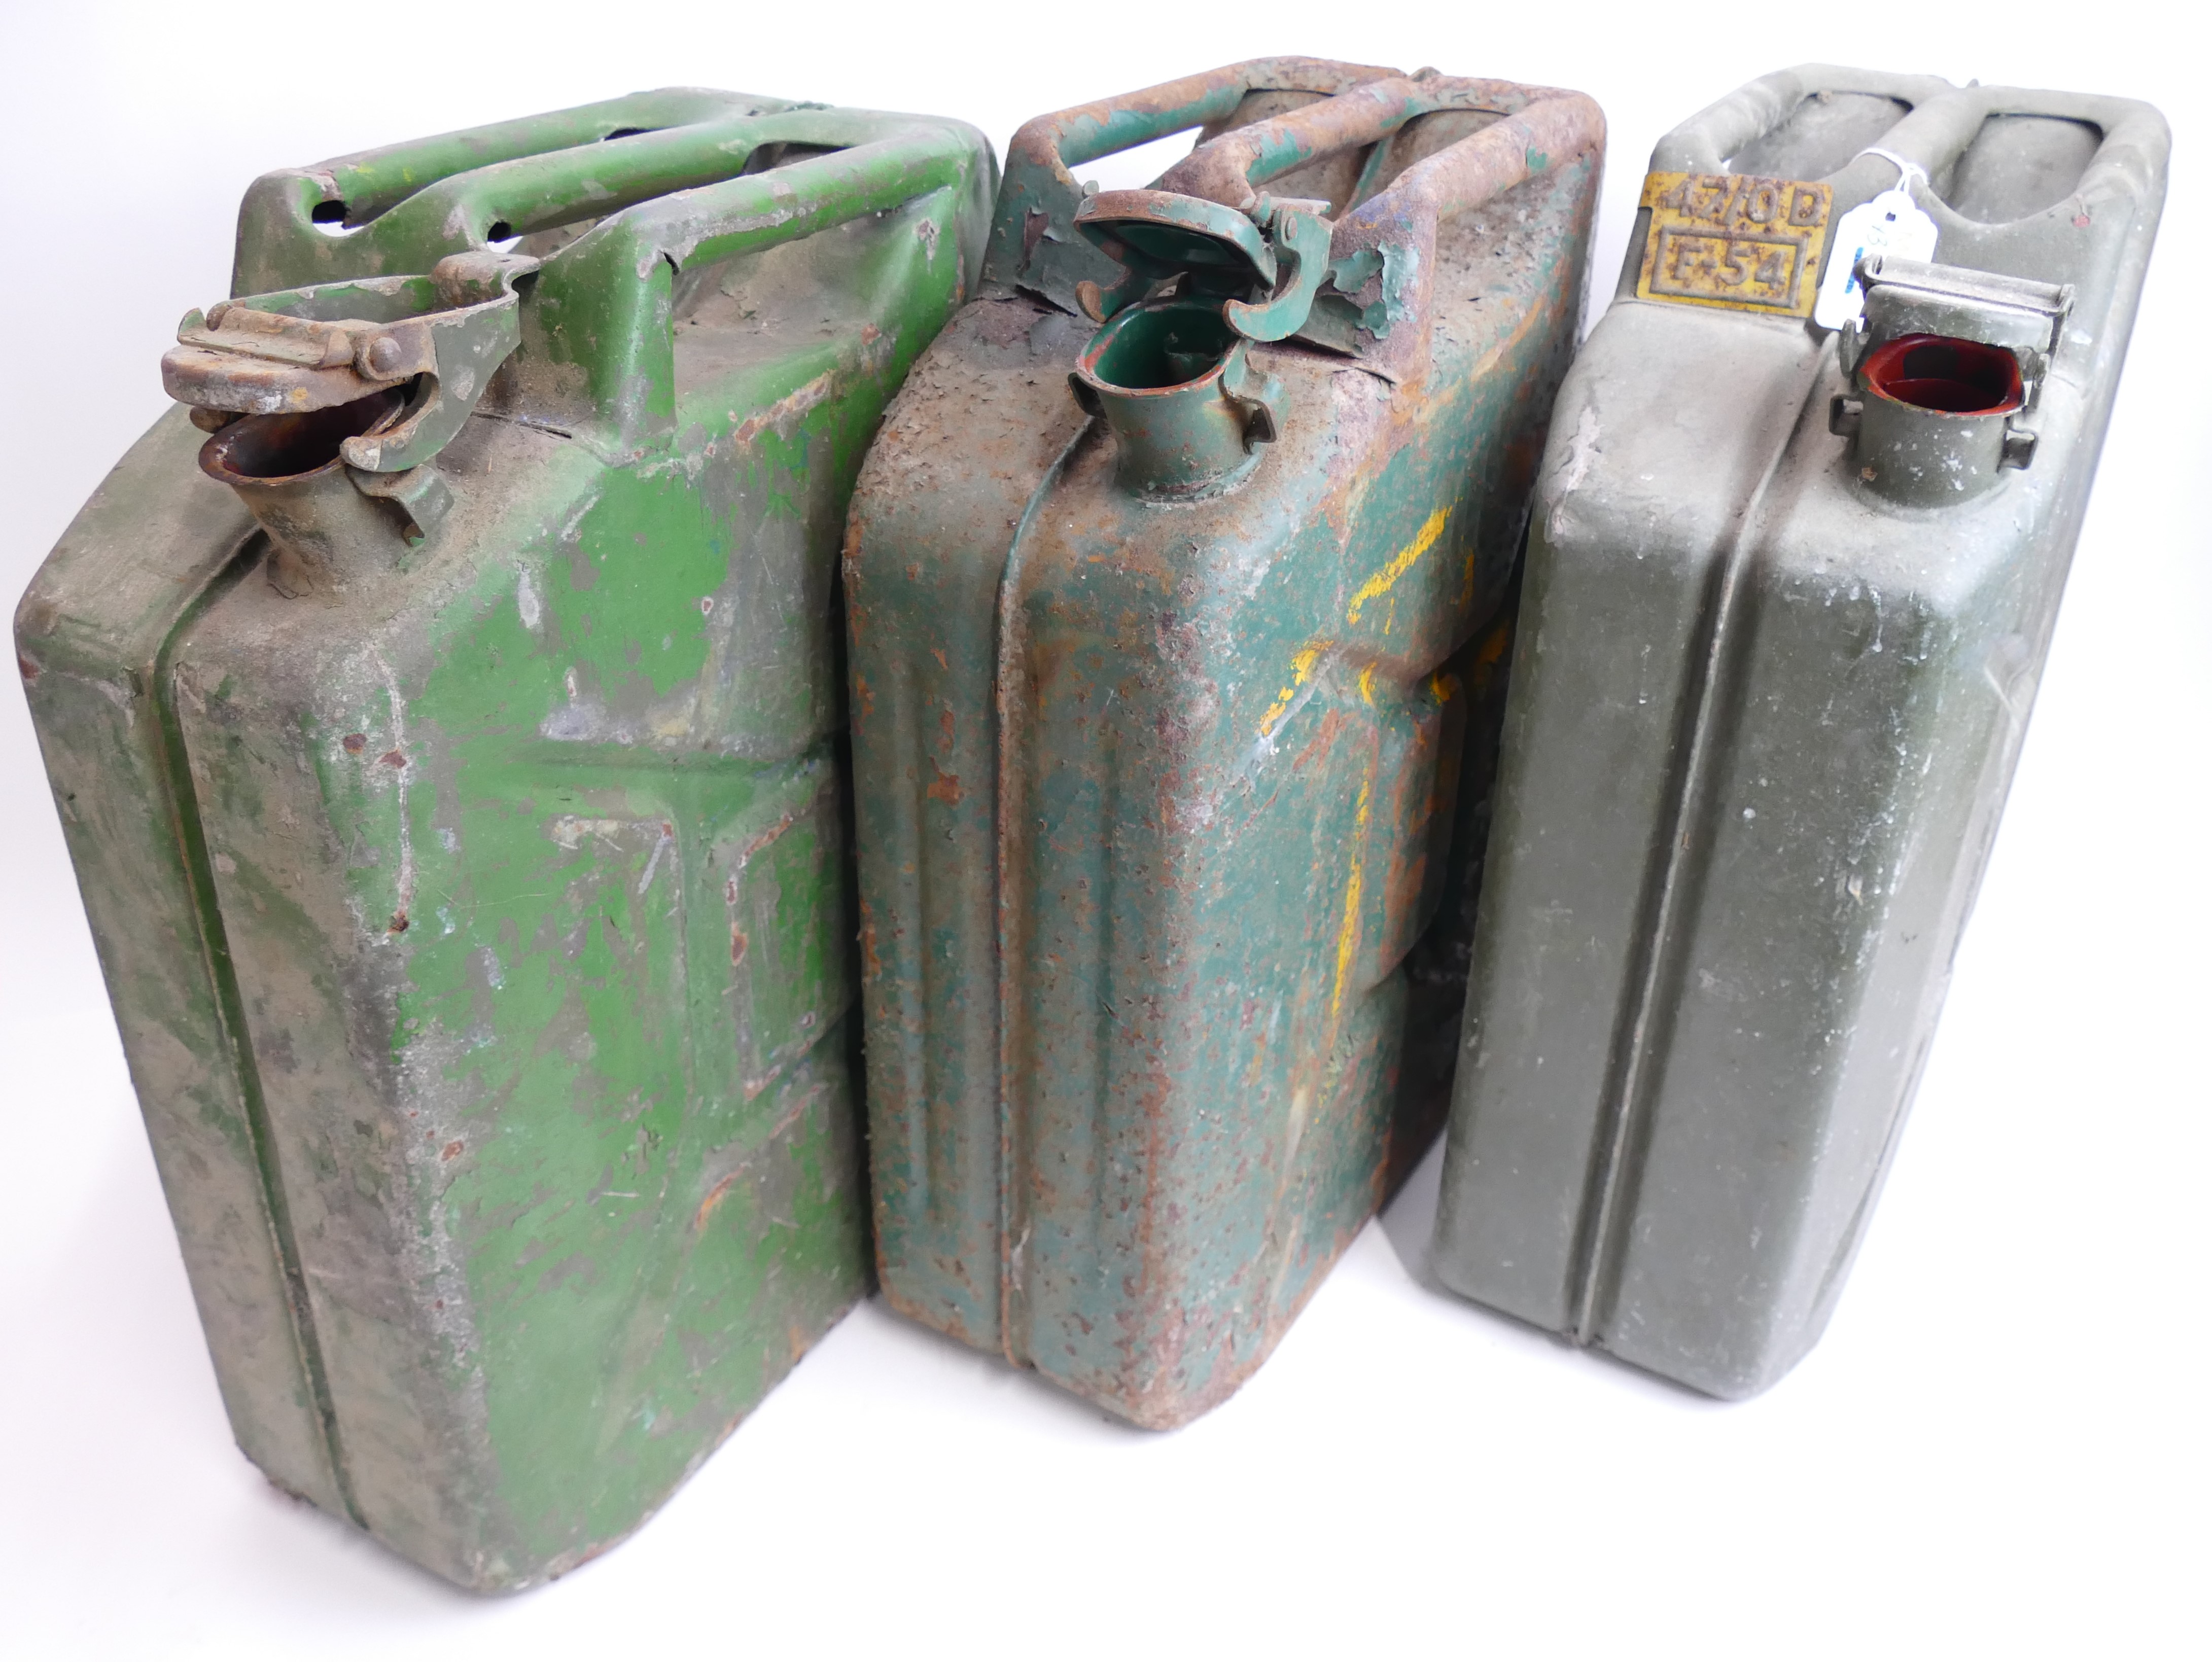 Three vintage Jerry cans